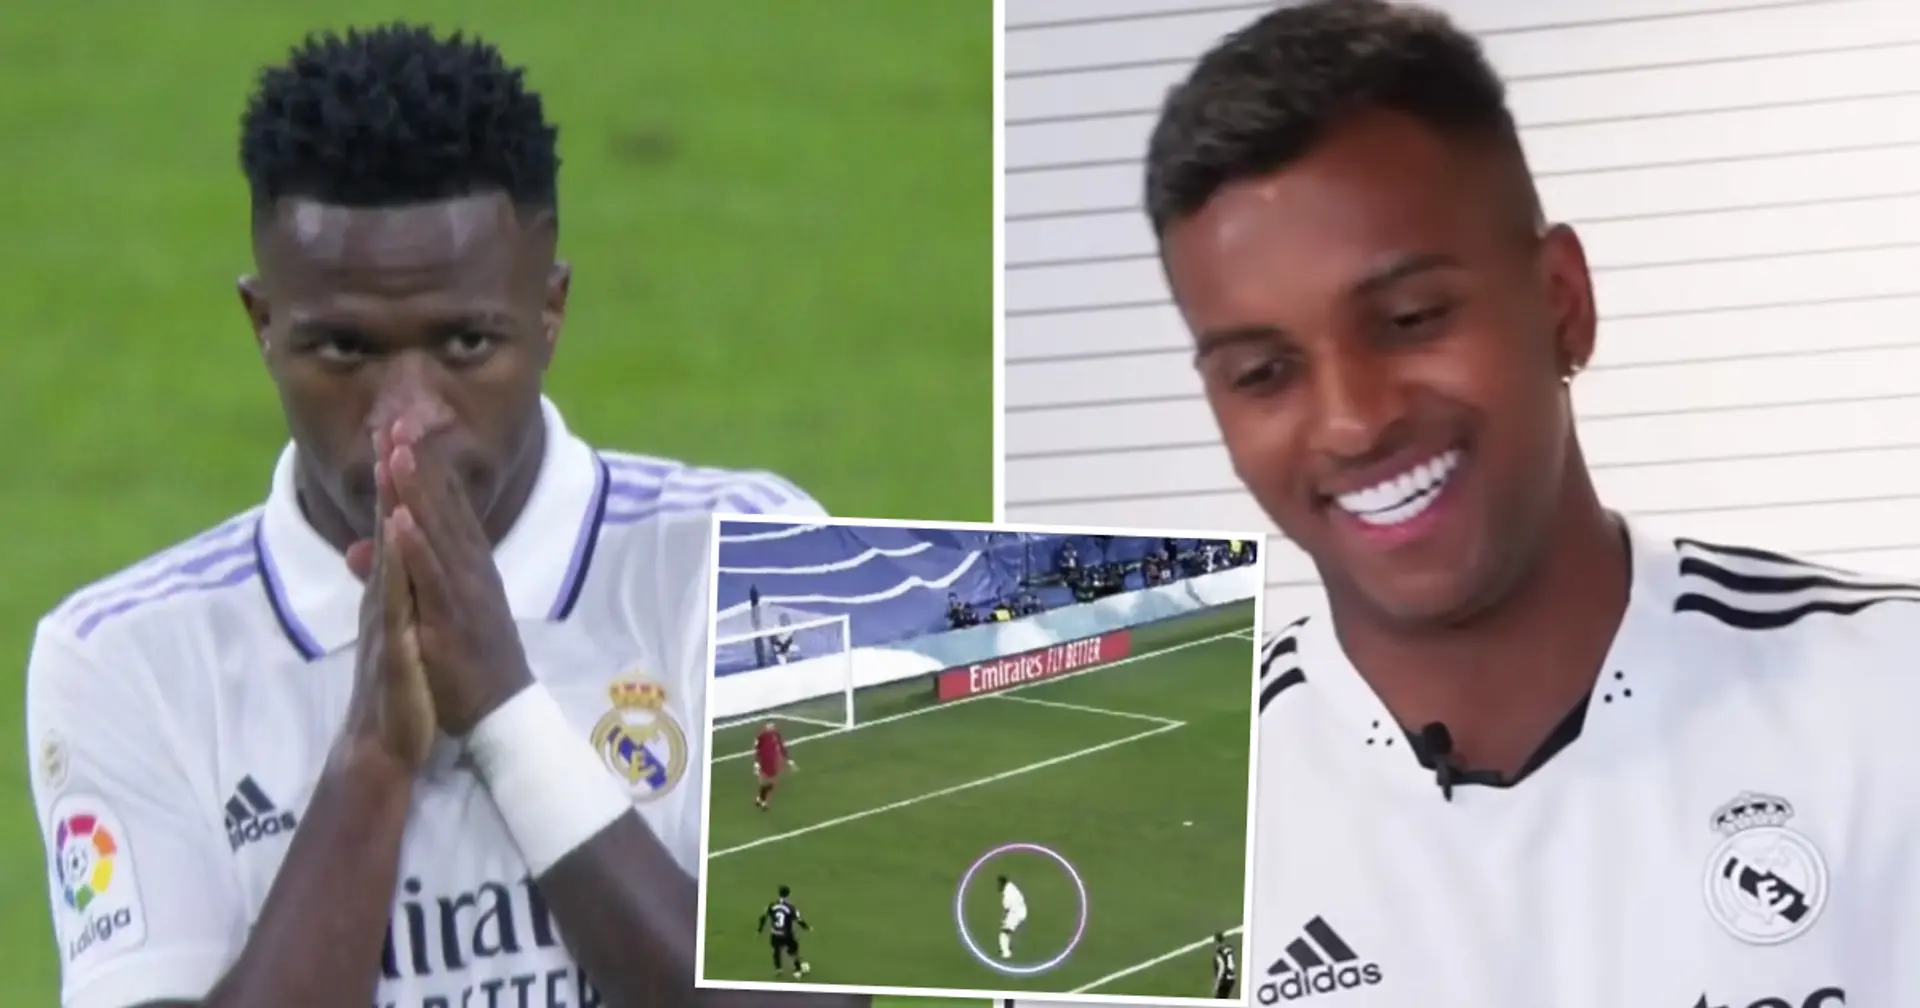 'Vini would never': Rodrygo praised for one particular episode in Sociedad draw